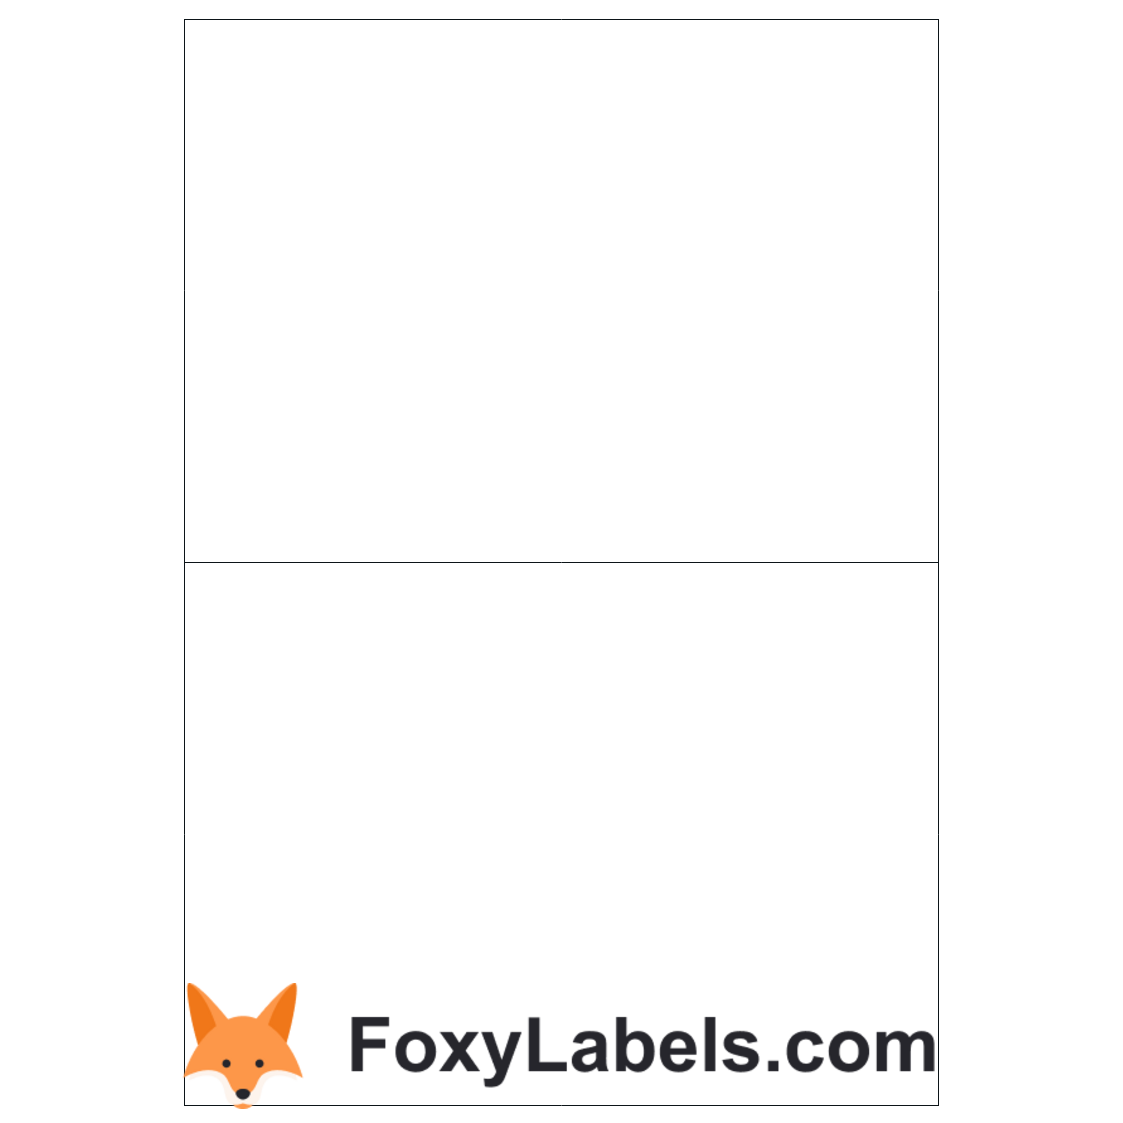 Avery L7568 label template for Google Docs